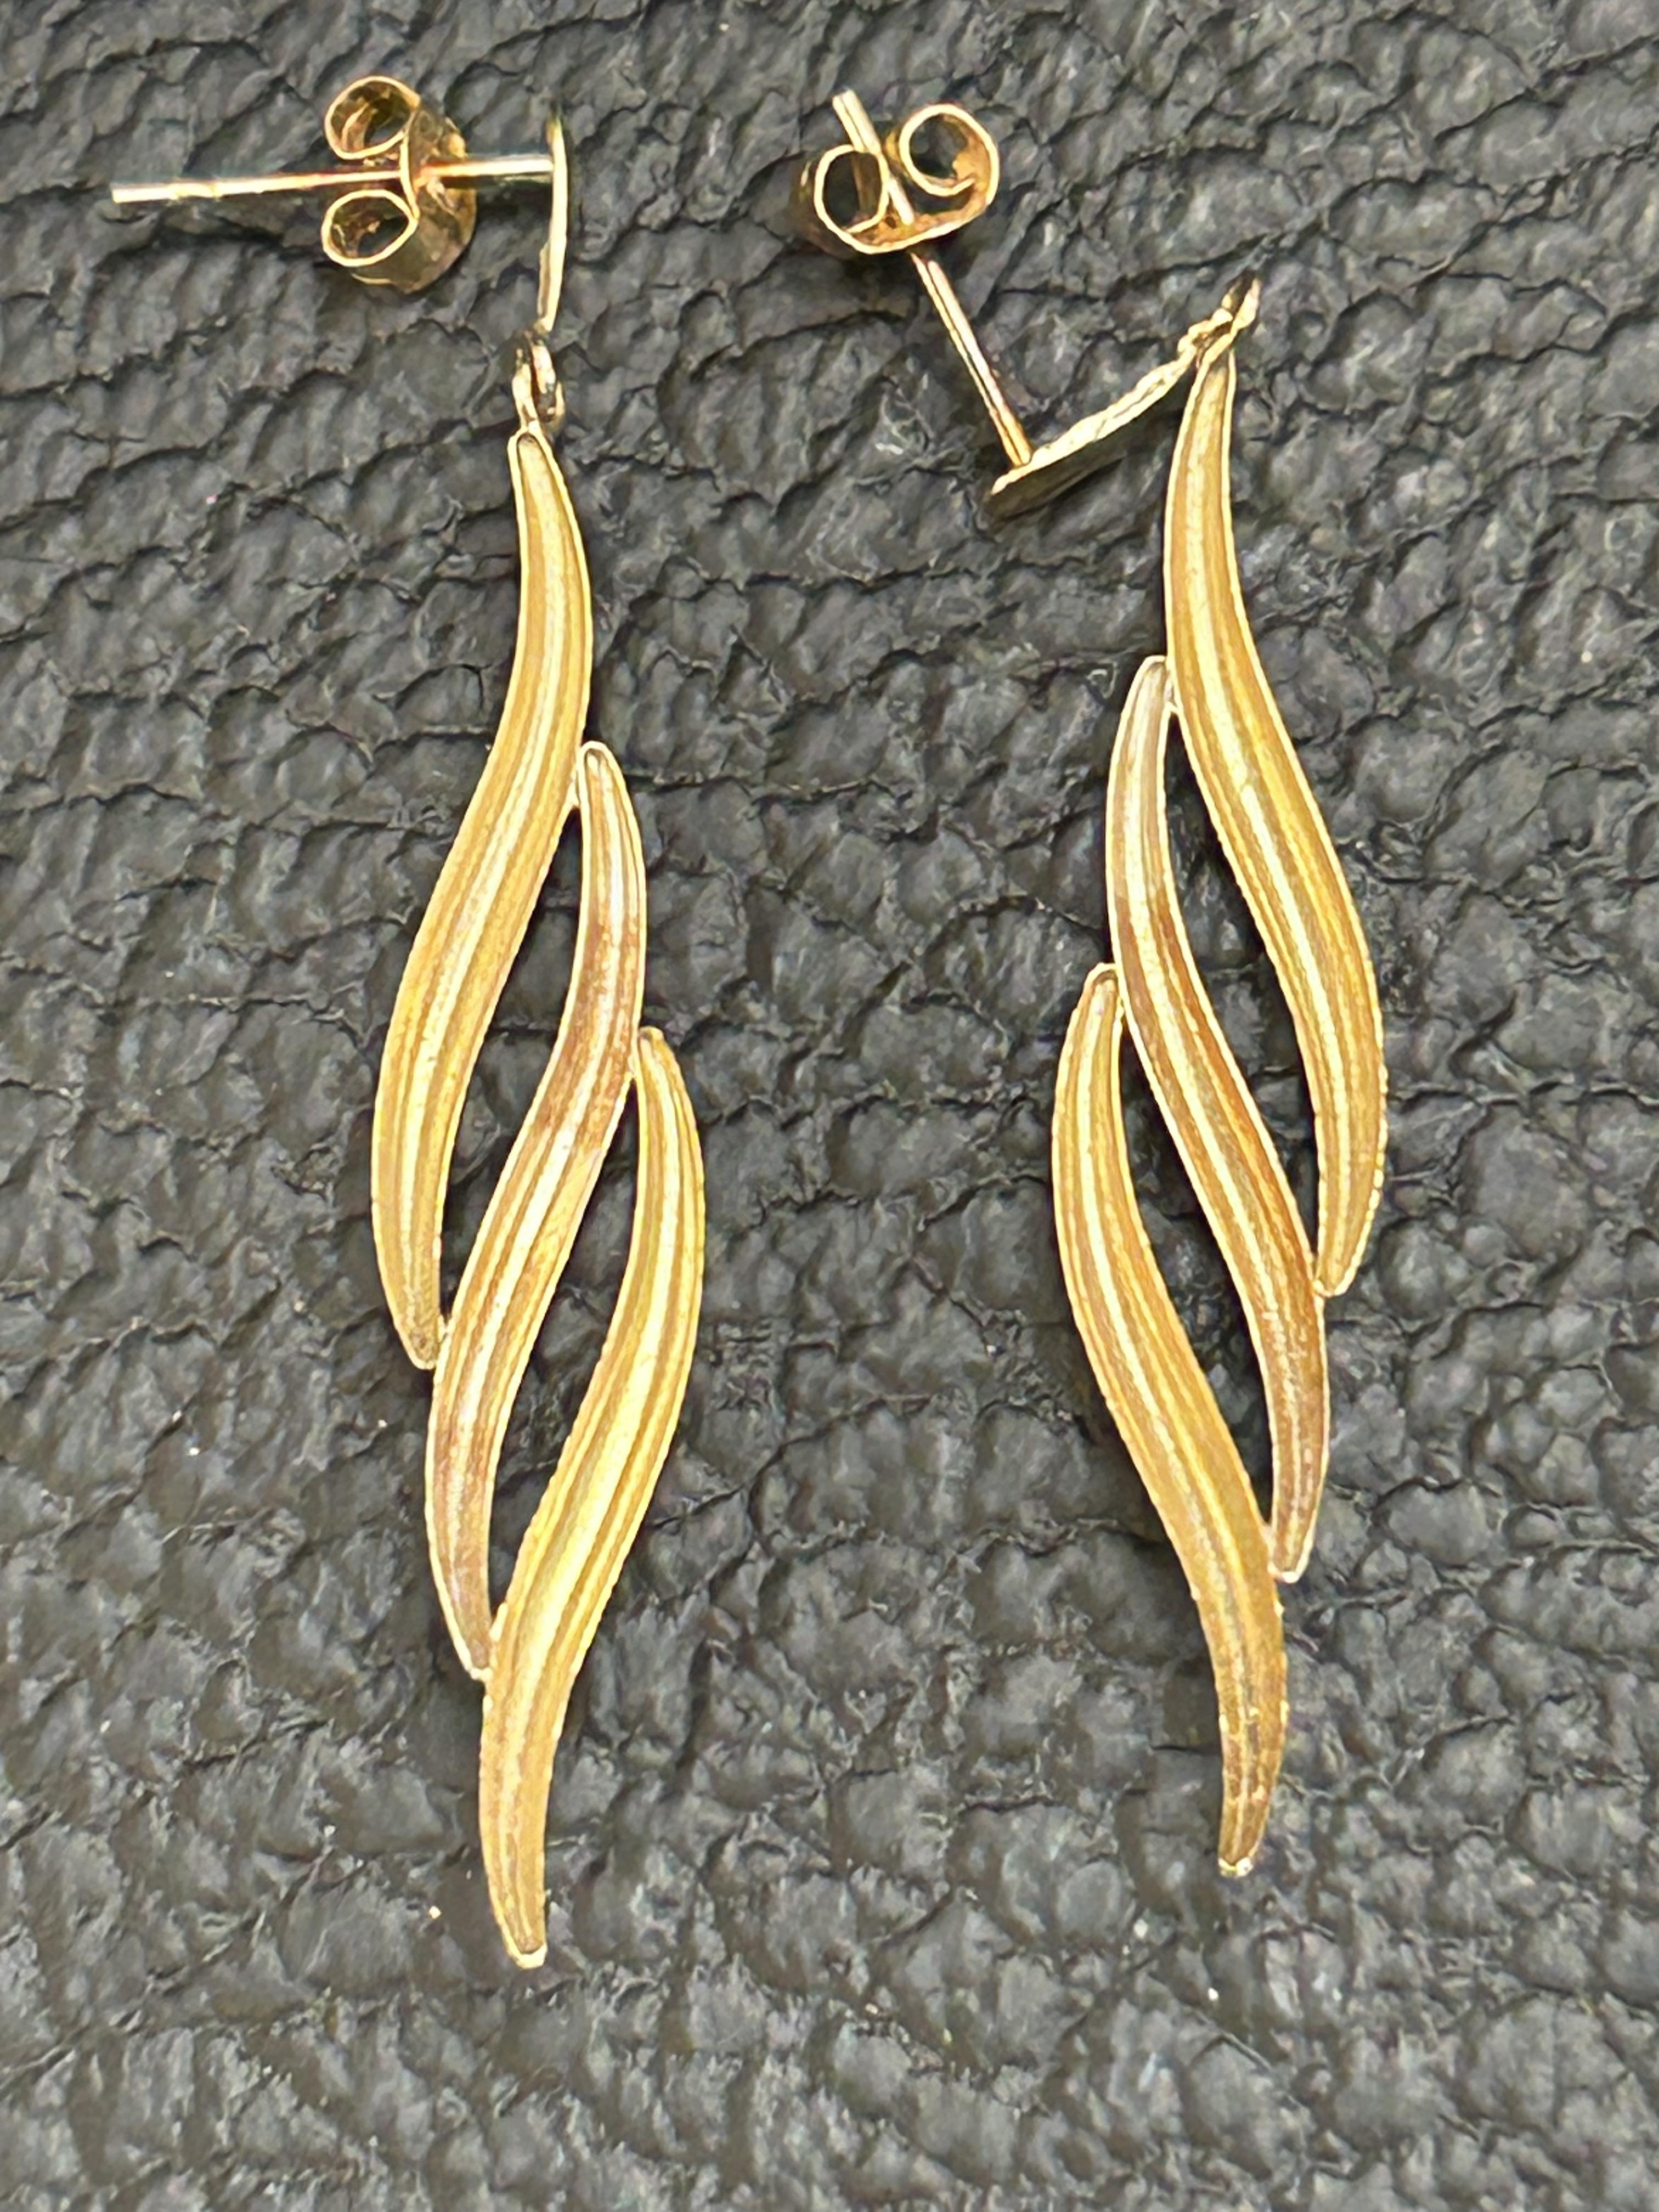 Pair of yellow metal earrings tested for gold